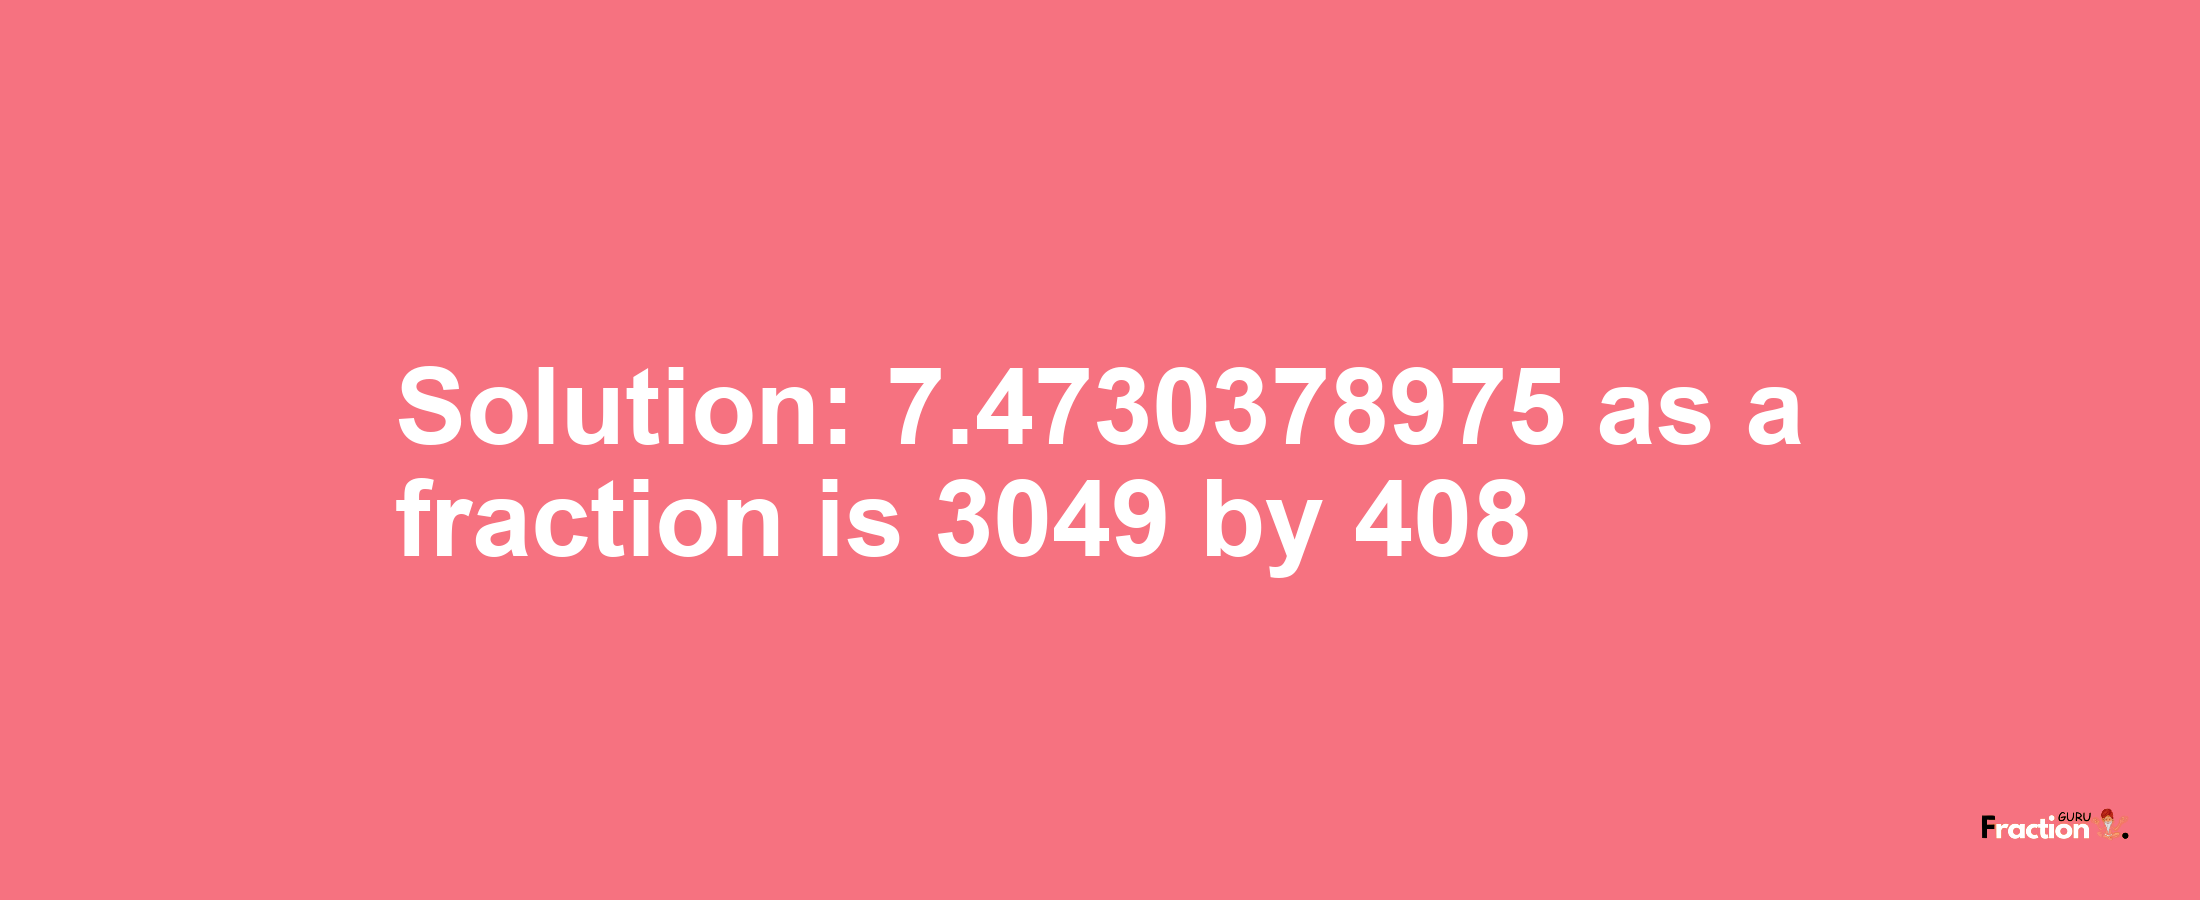 Solution:7.4730378975 as a fraction is 3049/408